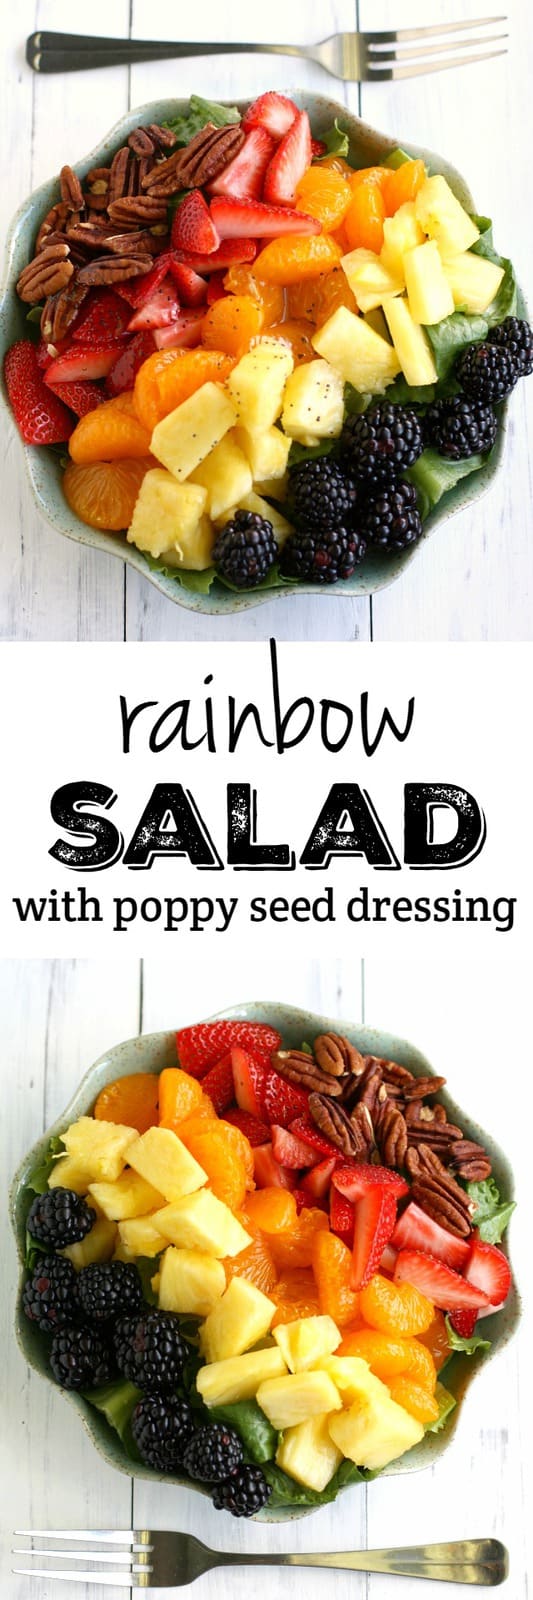 A fresh and delicious salad with a rainbow of fruits, pecans, and a poppy seed dressing. Inspired by Panera's salad, this version is easy to make at home!